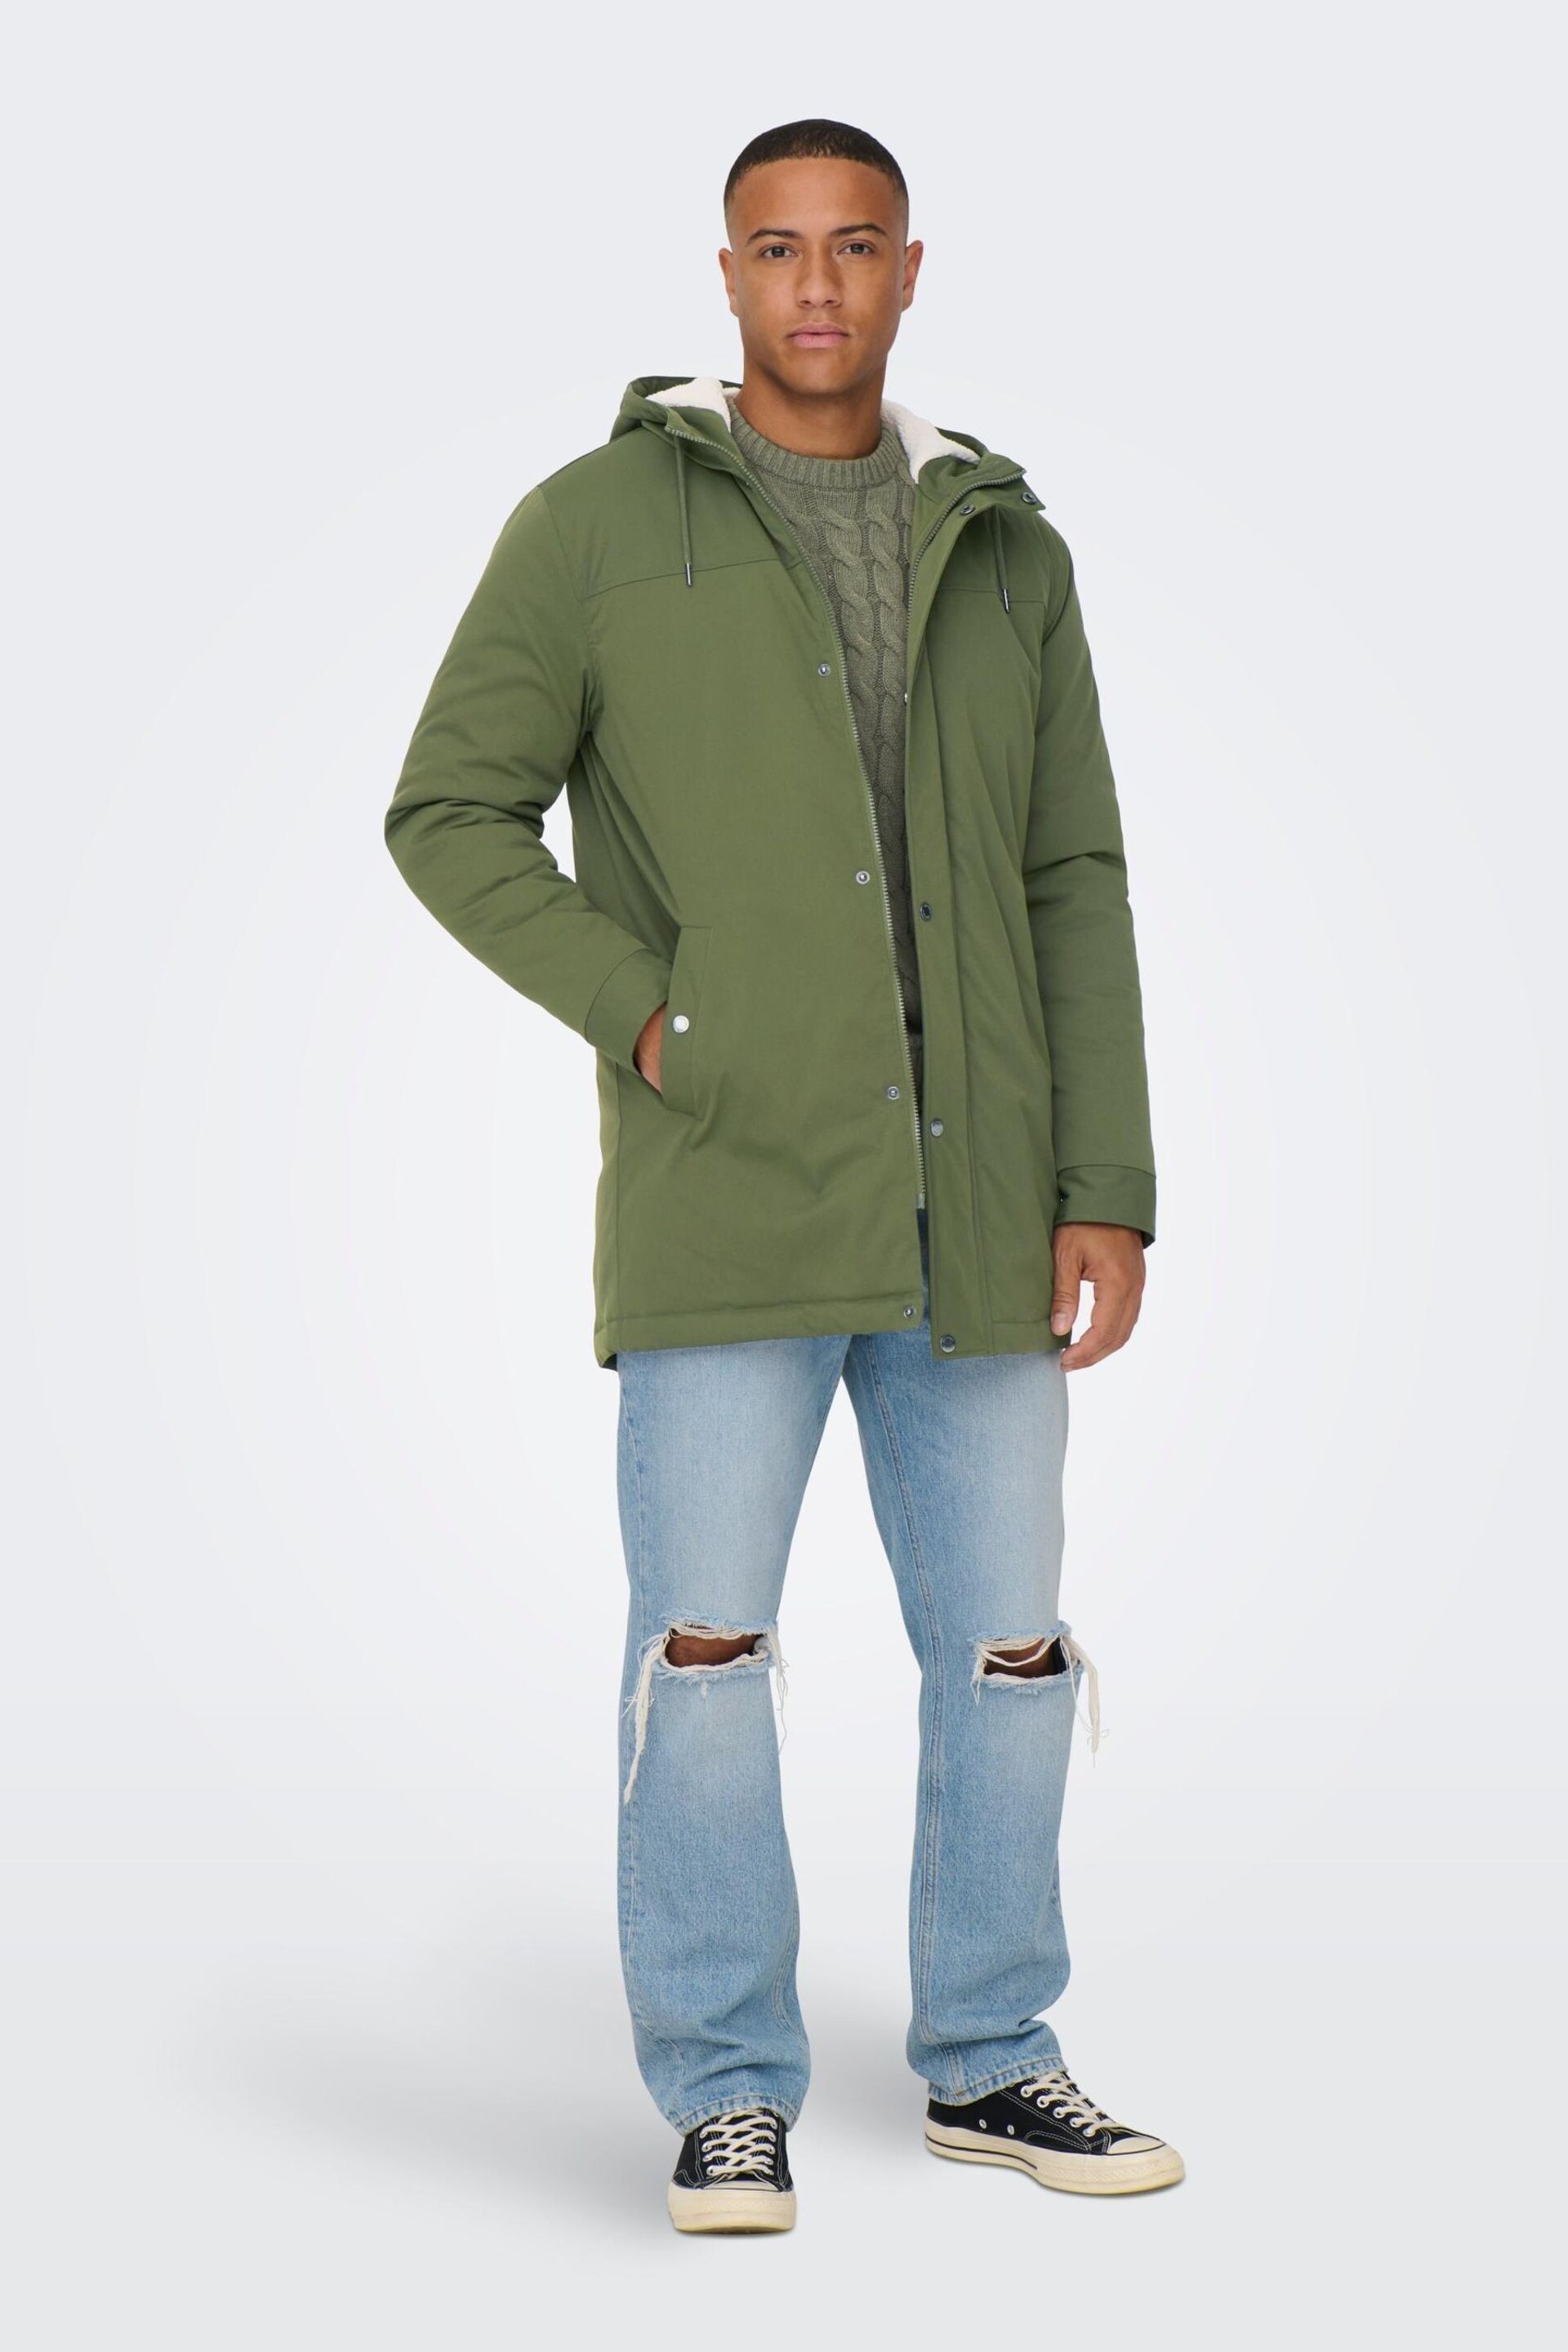 Only & Sons Green Parka Coat - Image 3 of 7